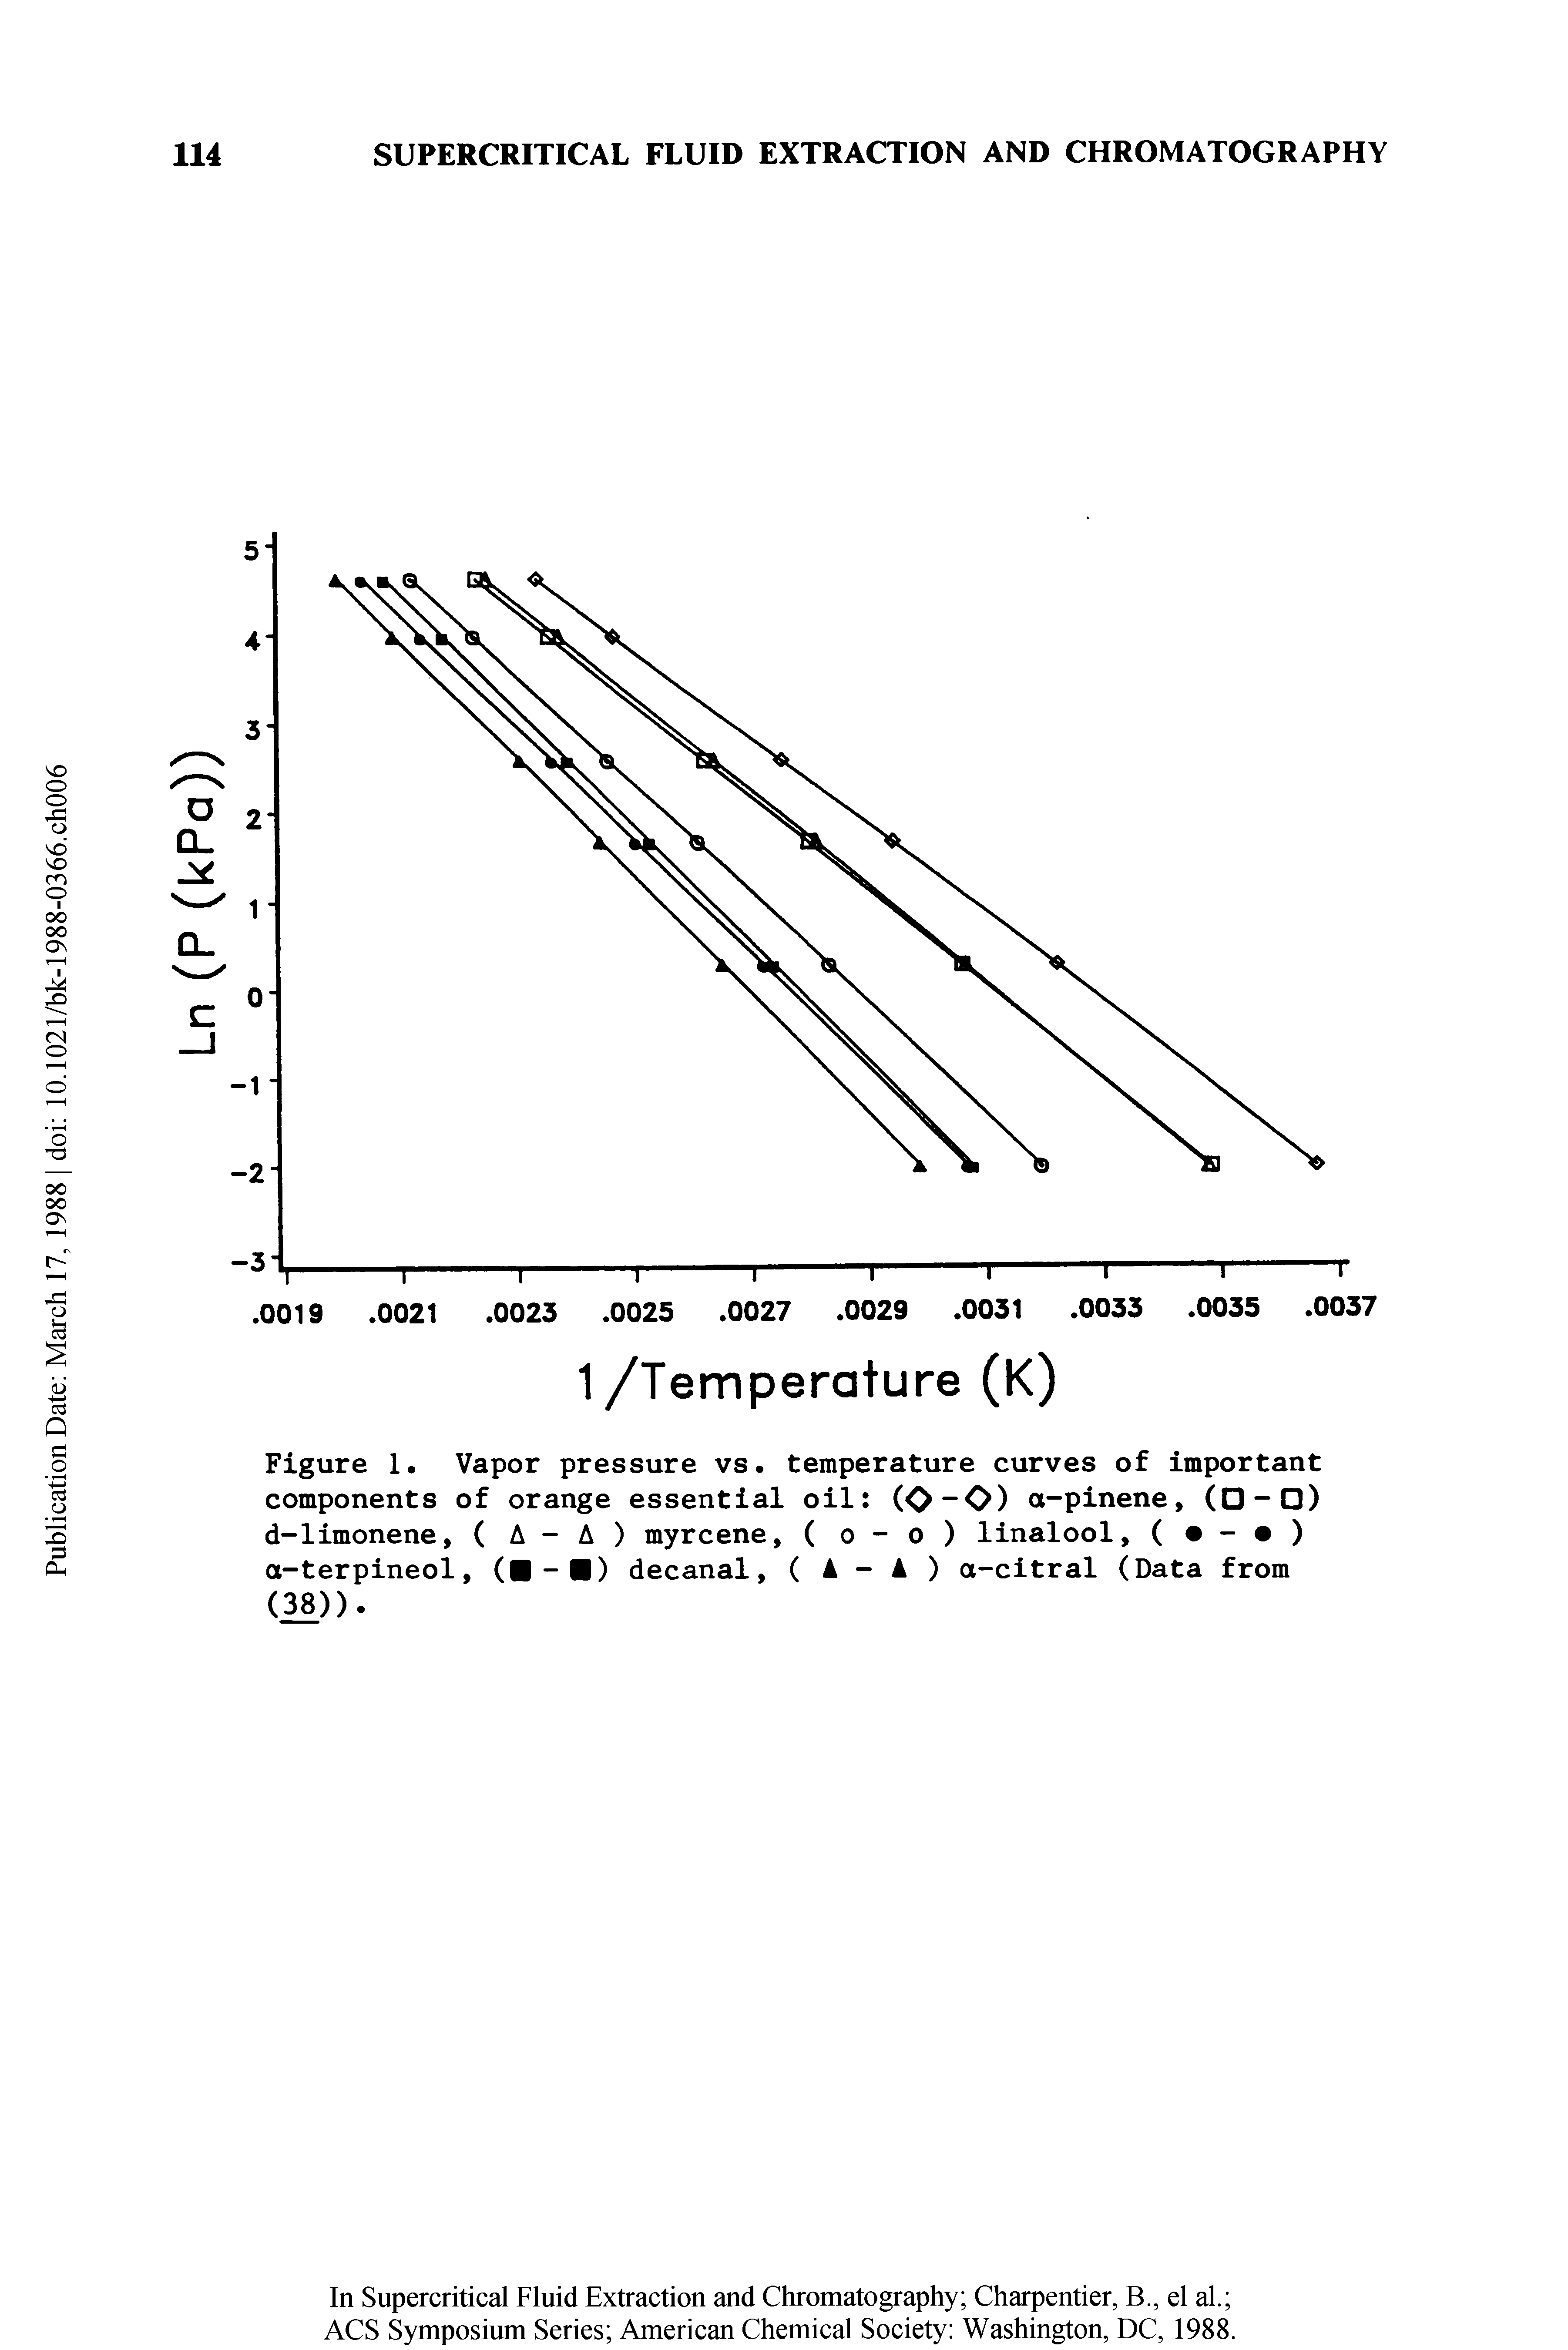 Figure 1. Vapor pressure vs. temperature curves of important components of orange essential oil (0 0) a-pinene, ( - ) d-limonene, ( A - A ) myrcene, ( o - o ) linalool, ( - ) a-terpineol, ( - ) decanal, ( A - A ) a-citral (Data from (38)).